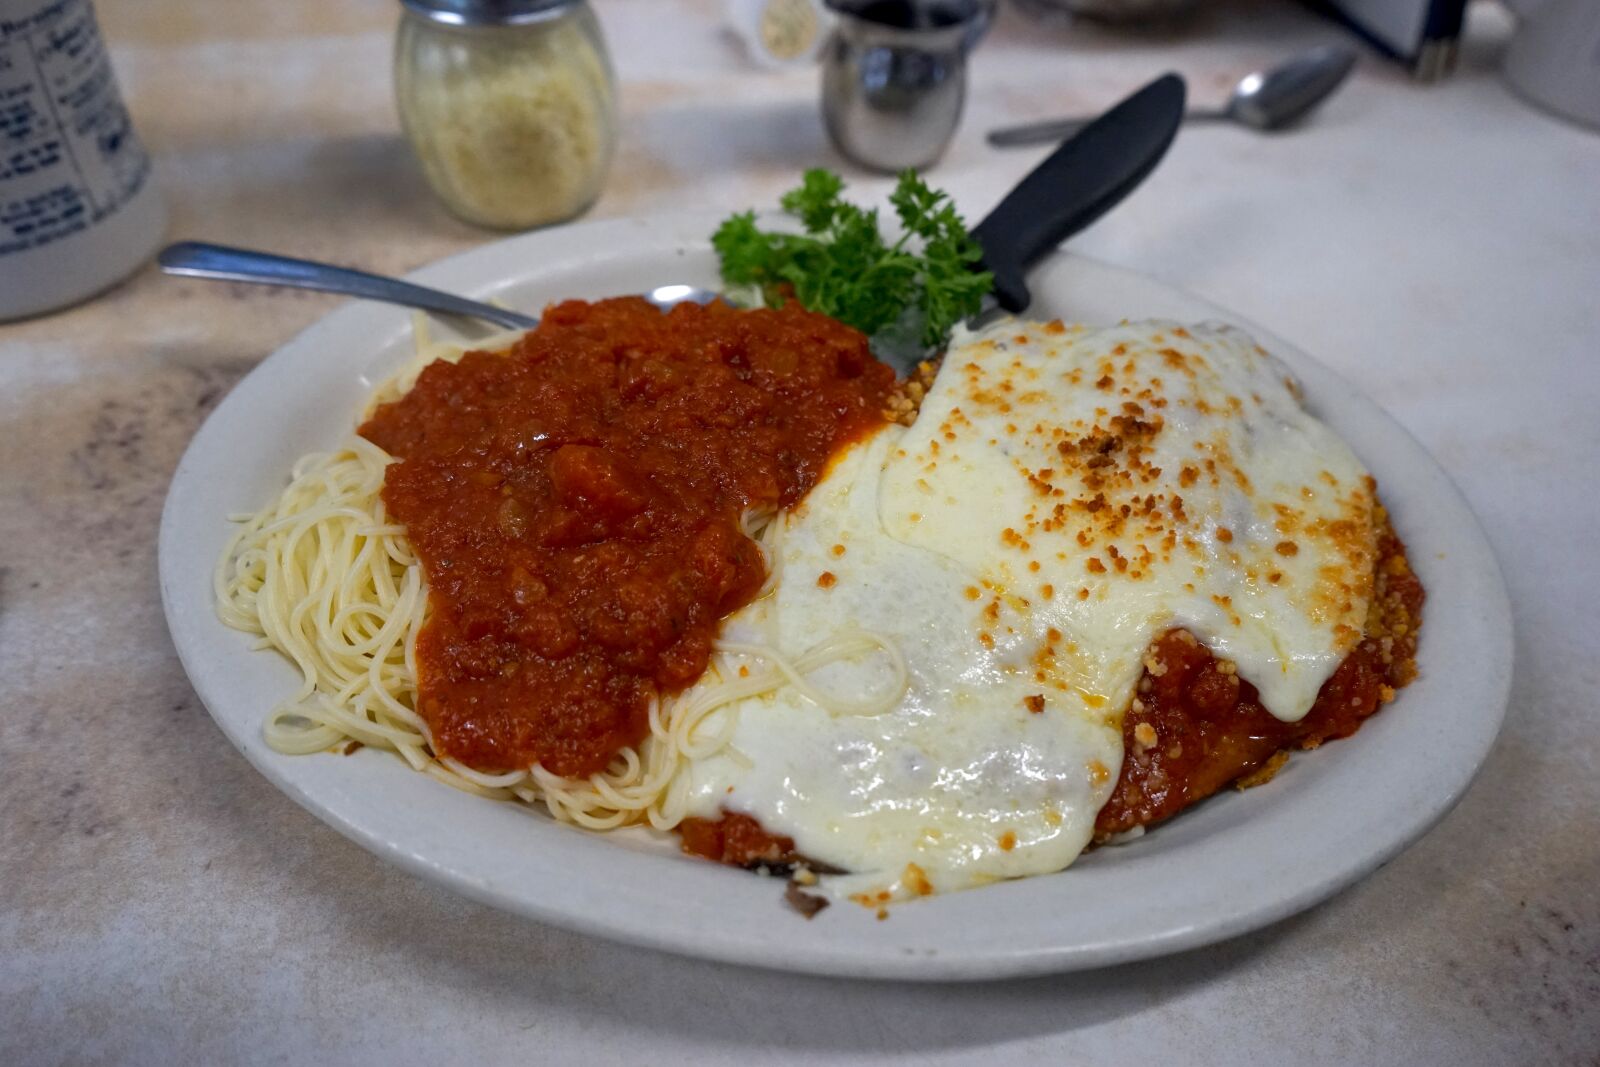 Sony a7 + Sony FE 28-70mm F3.5-5.6 OSS sample photo. Chicken parmesan, diner food photography